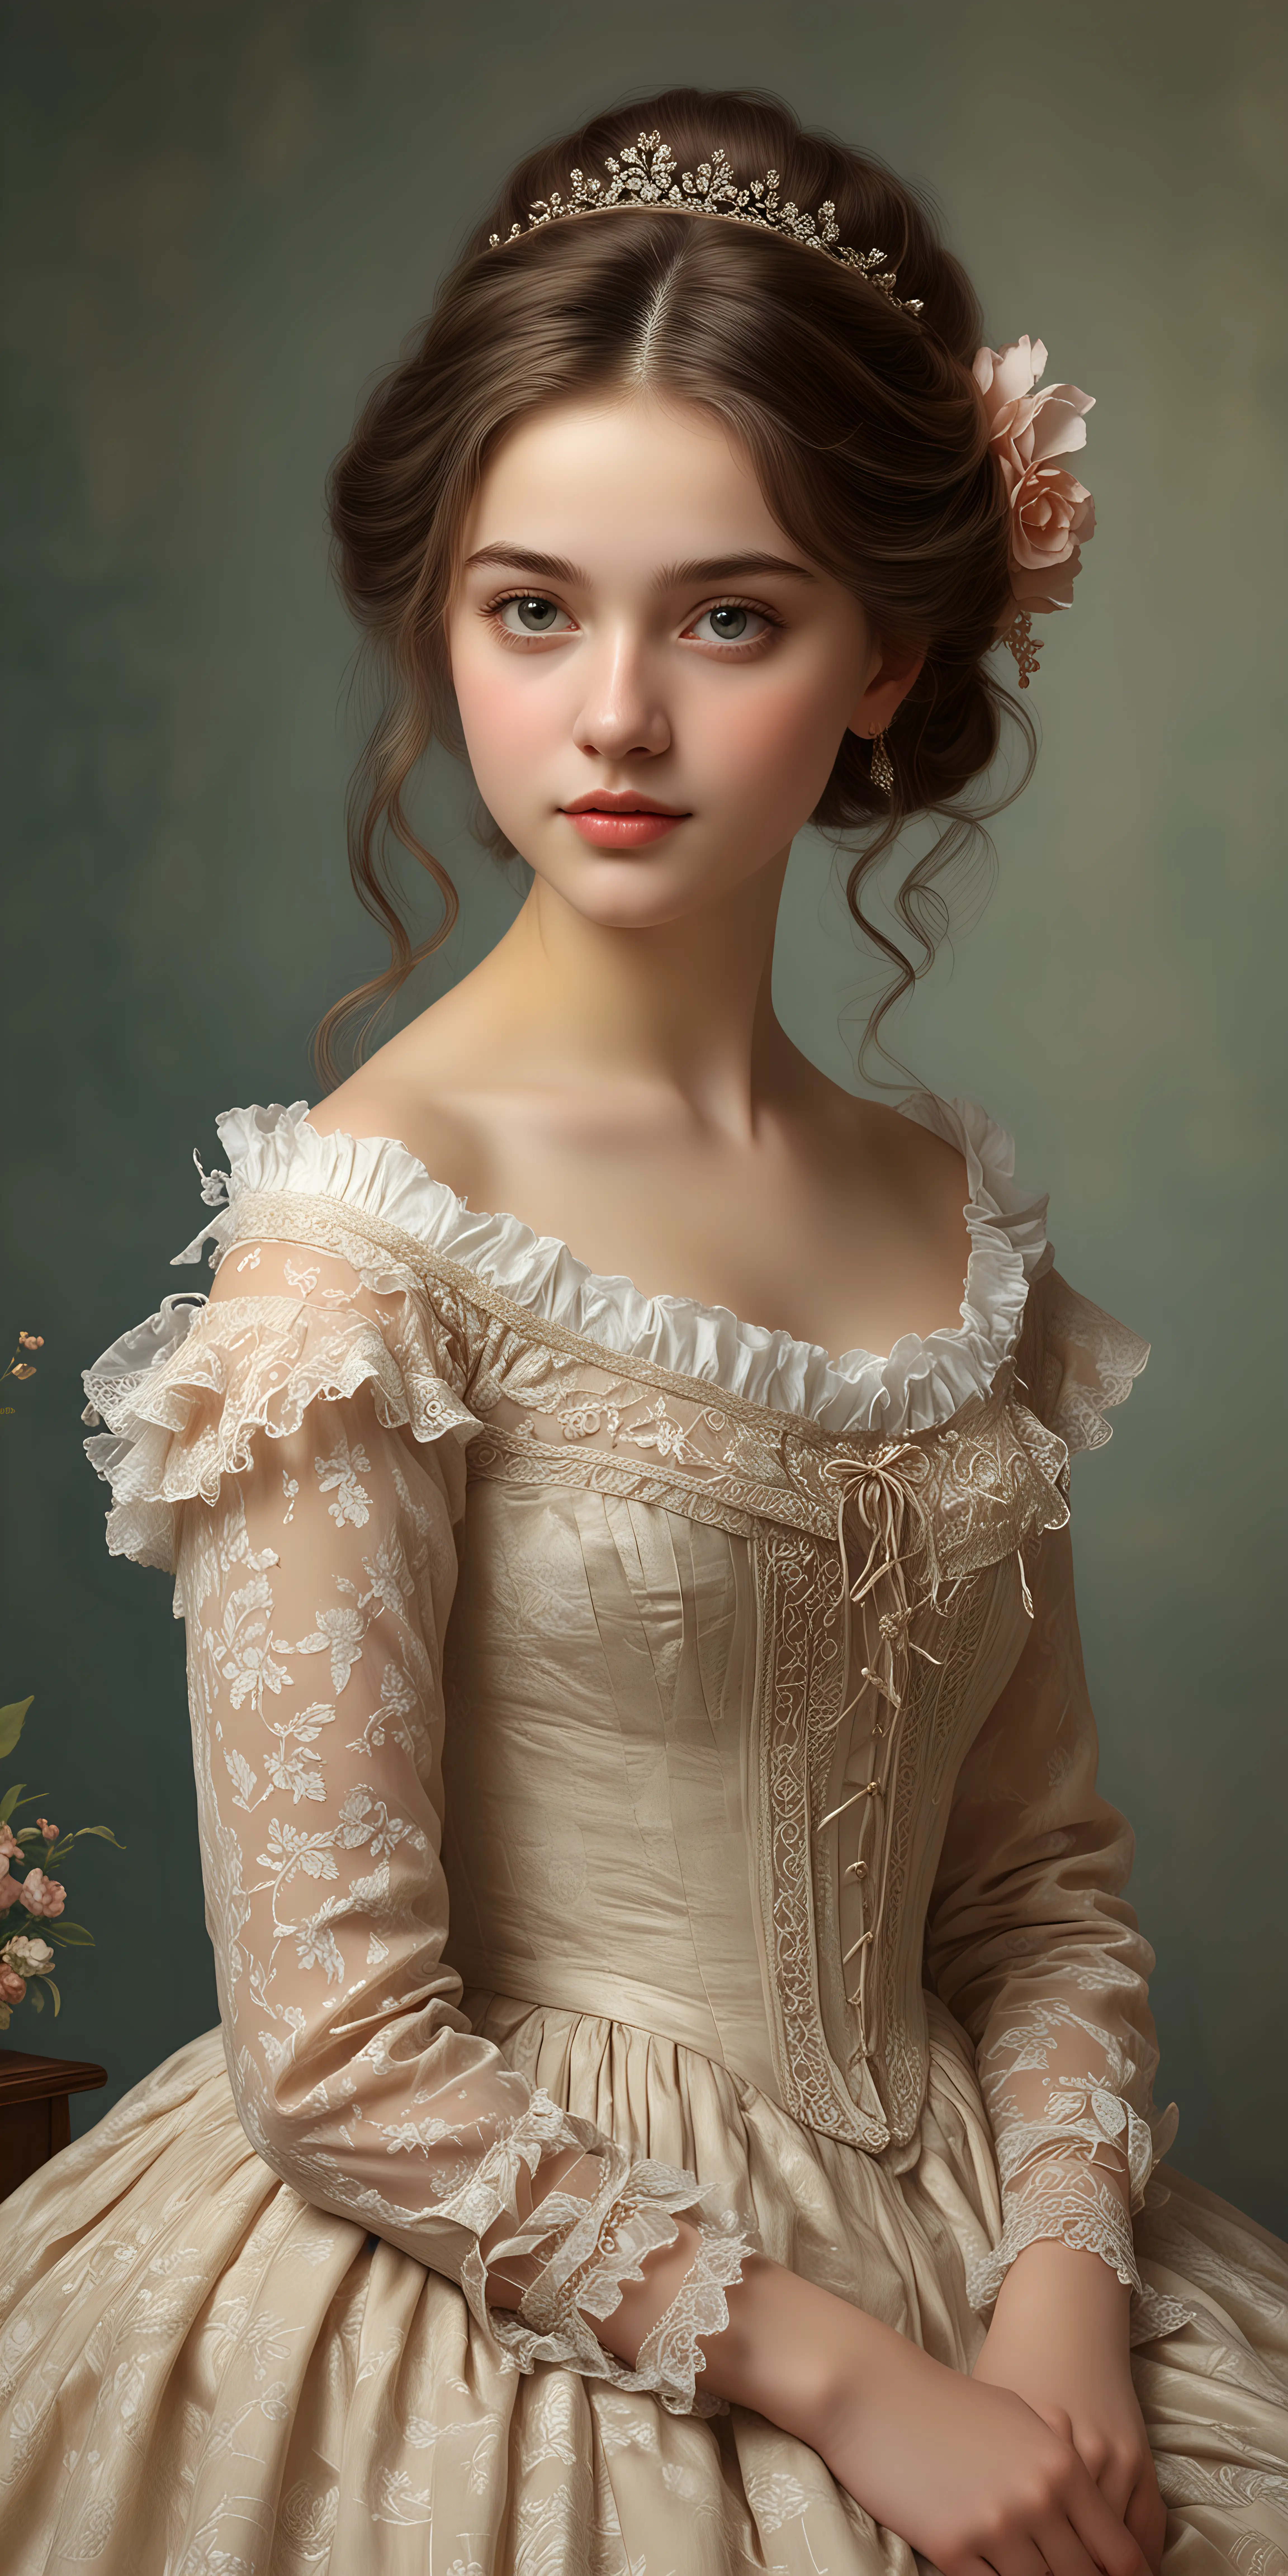 a captivating masterpiece that seamlessly blends the elegance of the 19th century with the innovation of digital art. This stunning portrait brings to life the enchanting beauty of a girl in the style reminiscent of a bygone era. With meticulous attention to detail, the artist has expertly captured the delicate features, graceful poise, and timeless allure of the subject – 